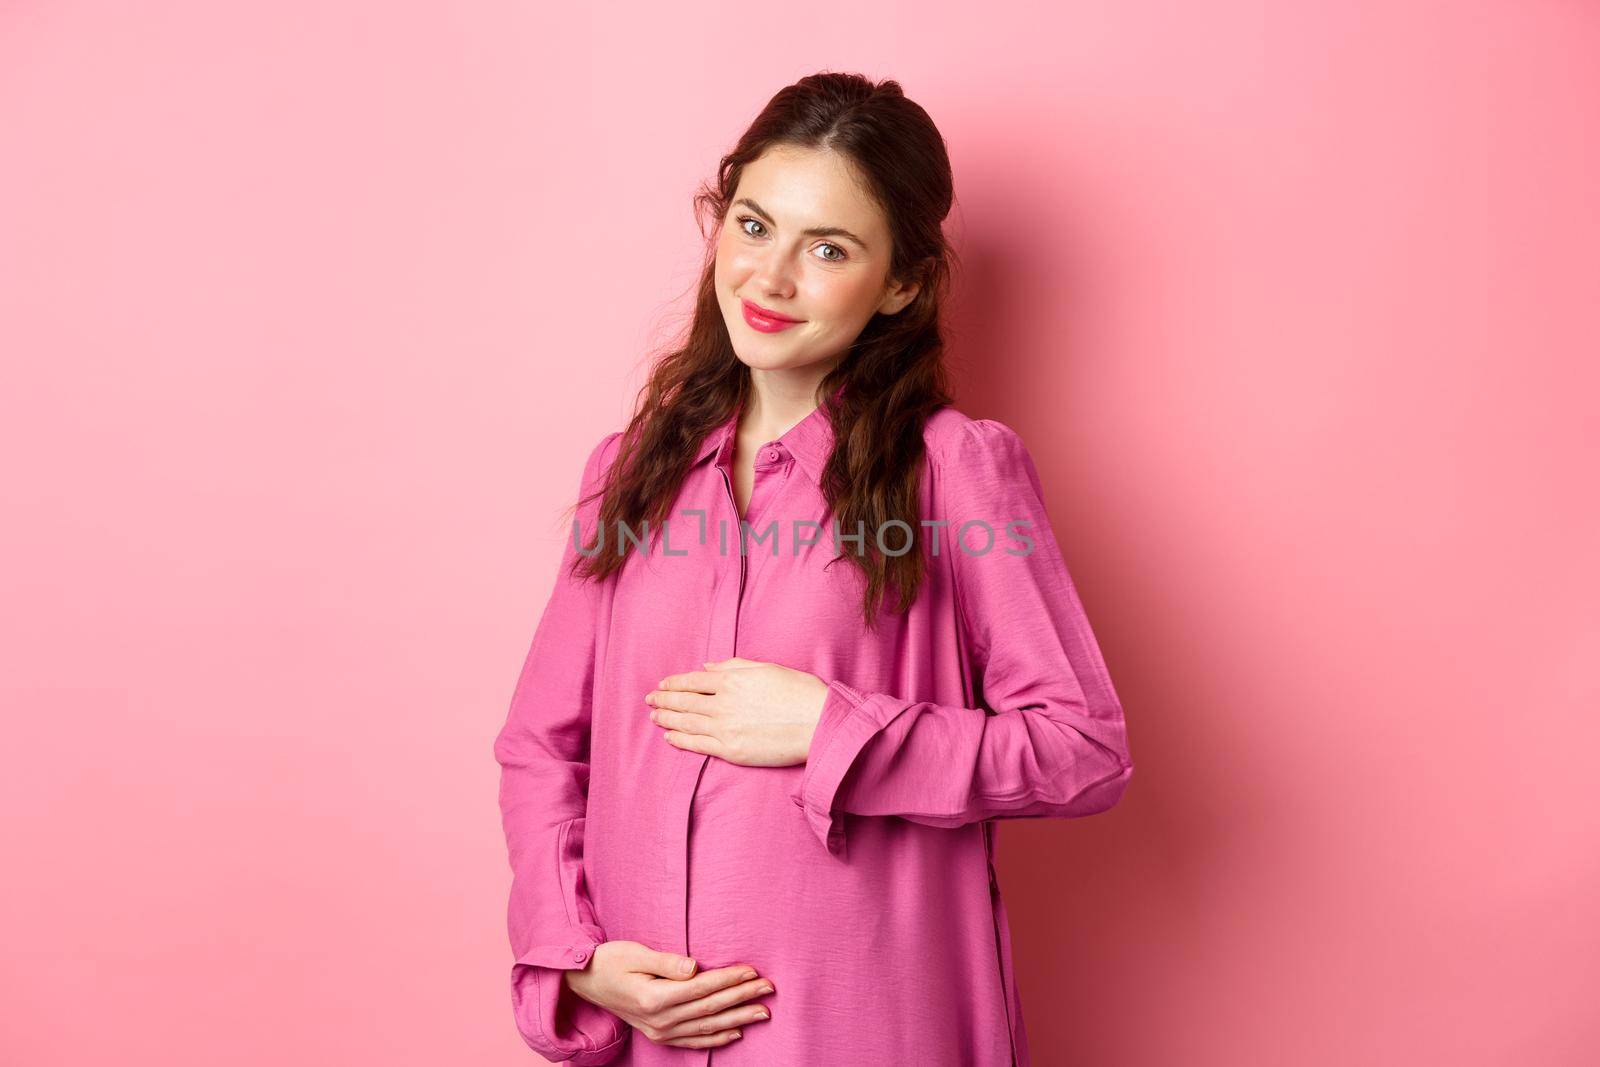 I'm stuffed. Pleased smiling girl showing her tummy after eating well, rubbing belly with satisfied face. Young pregnant woman expecting child, looking kind at camera, pink background.